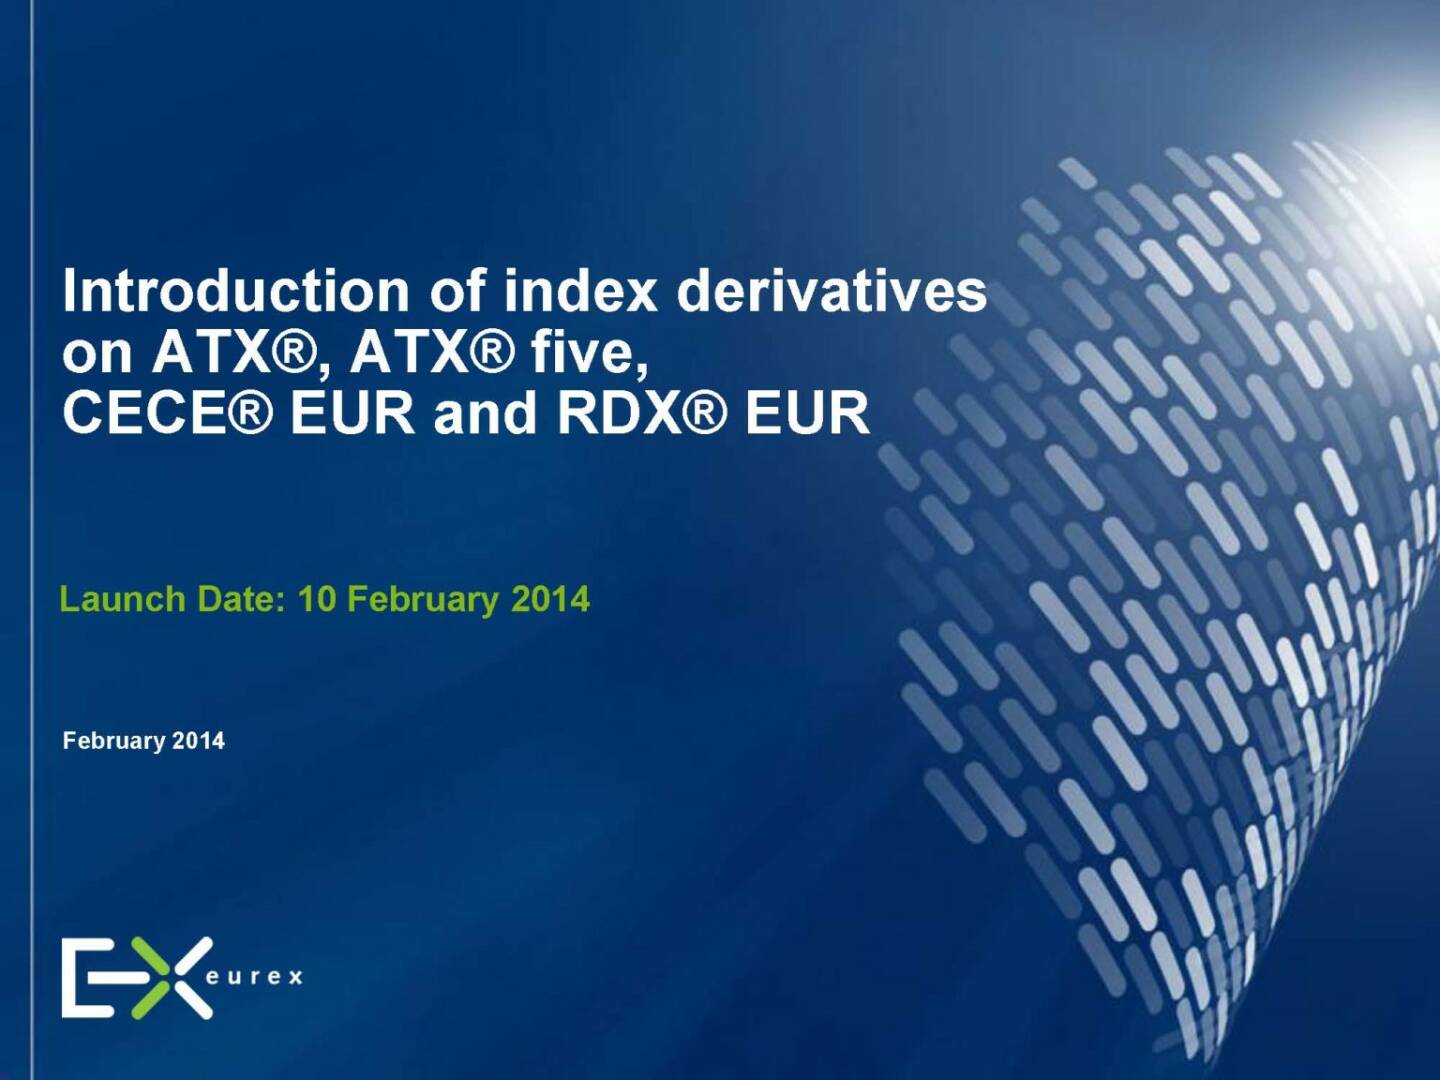 Introduction of index derivatives on ATX®, ATX® five, CECE® EUR and RDX® EUR